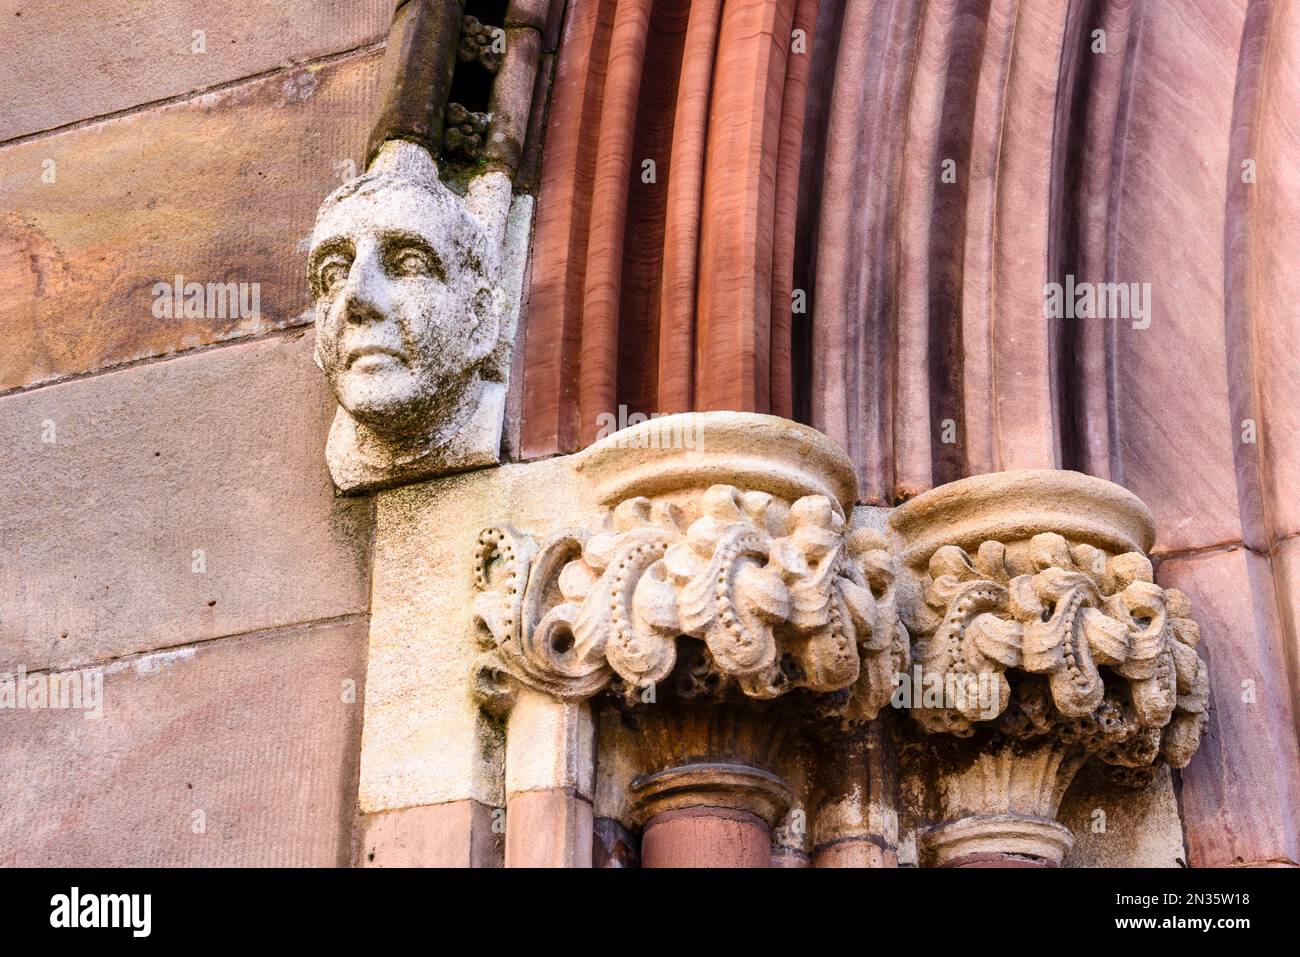 Ornately carved stone head and face on the outside of a church entrance. Stock Photo